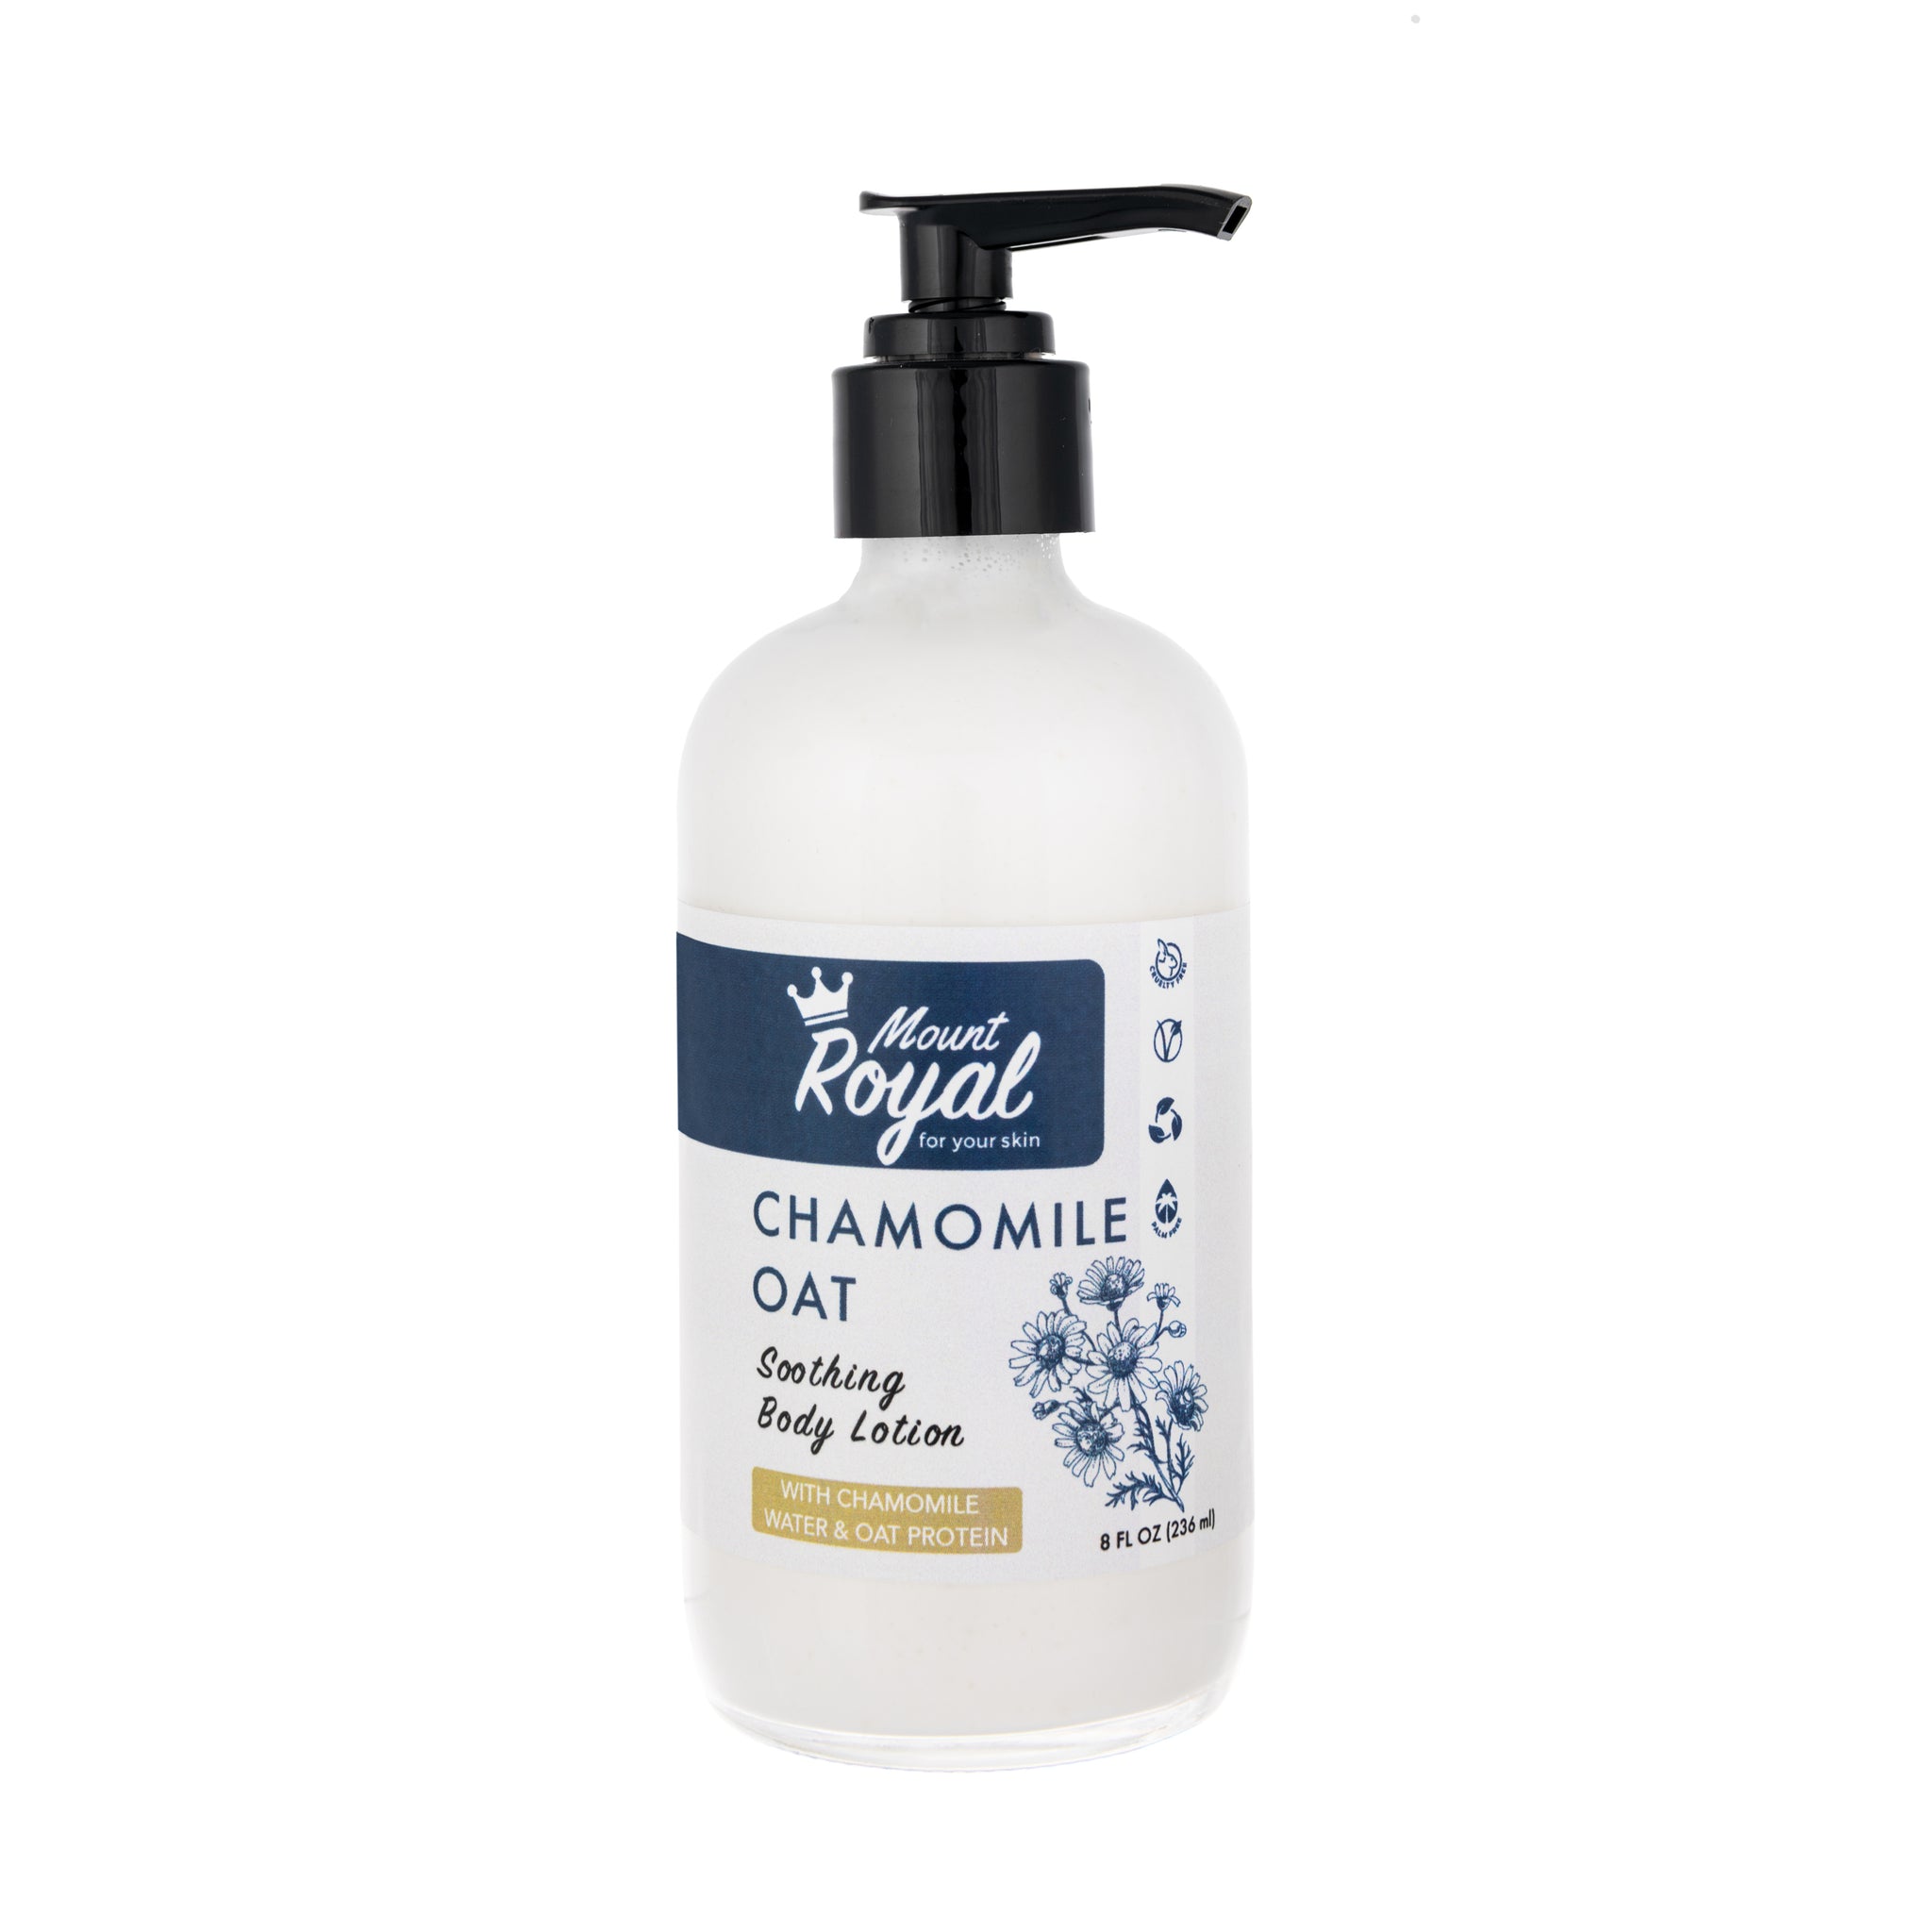 Chamomile & Oat Protein Body Lotion